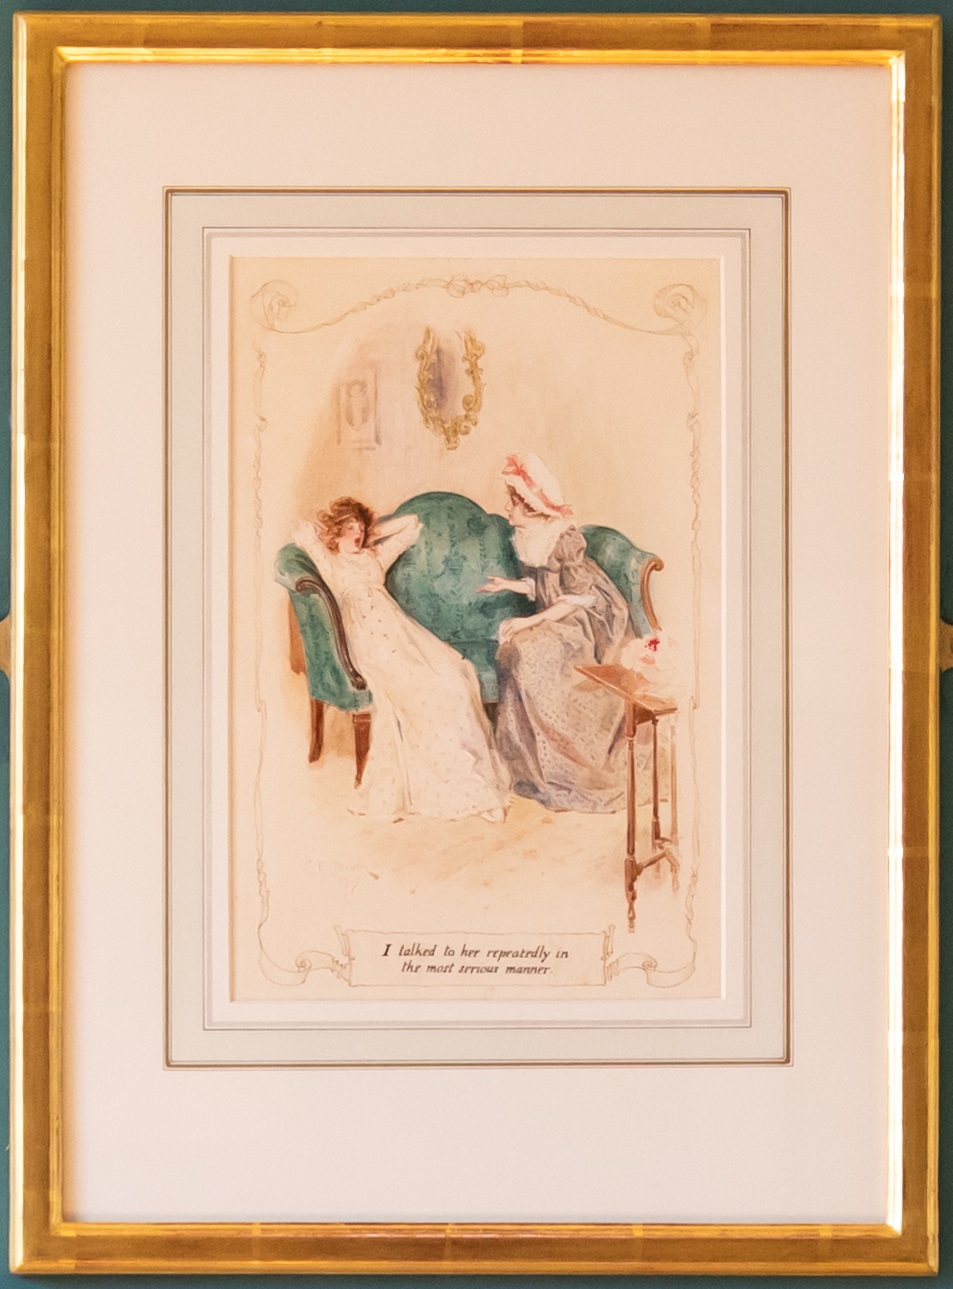 Original illustration by CE Brock, entitled 'I talked to her repeatedly in the most serious manner', signed and dated 1907